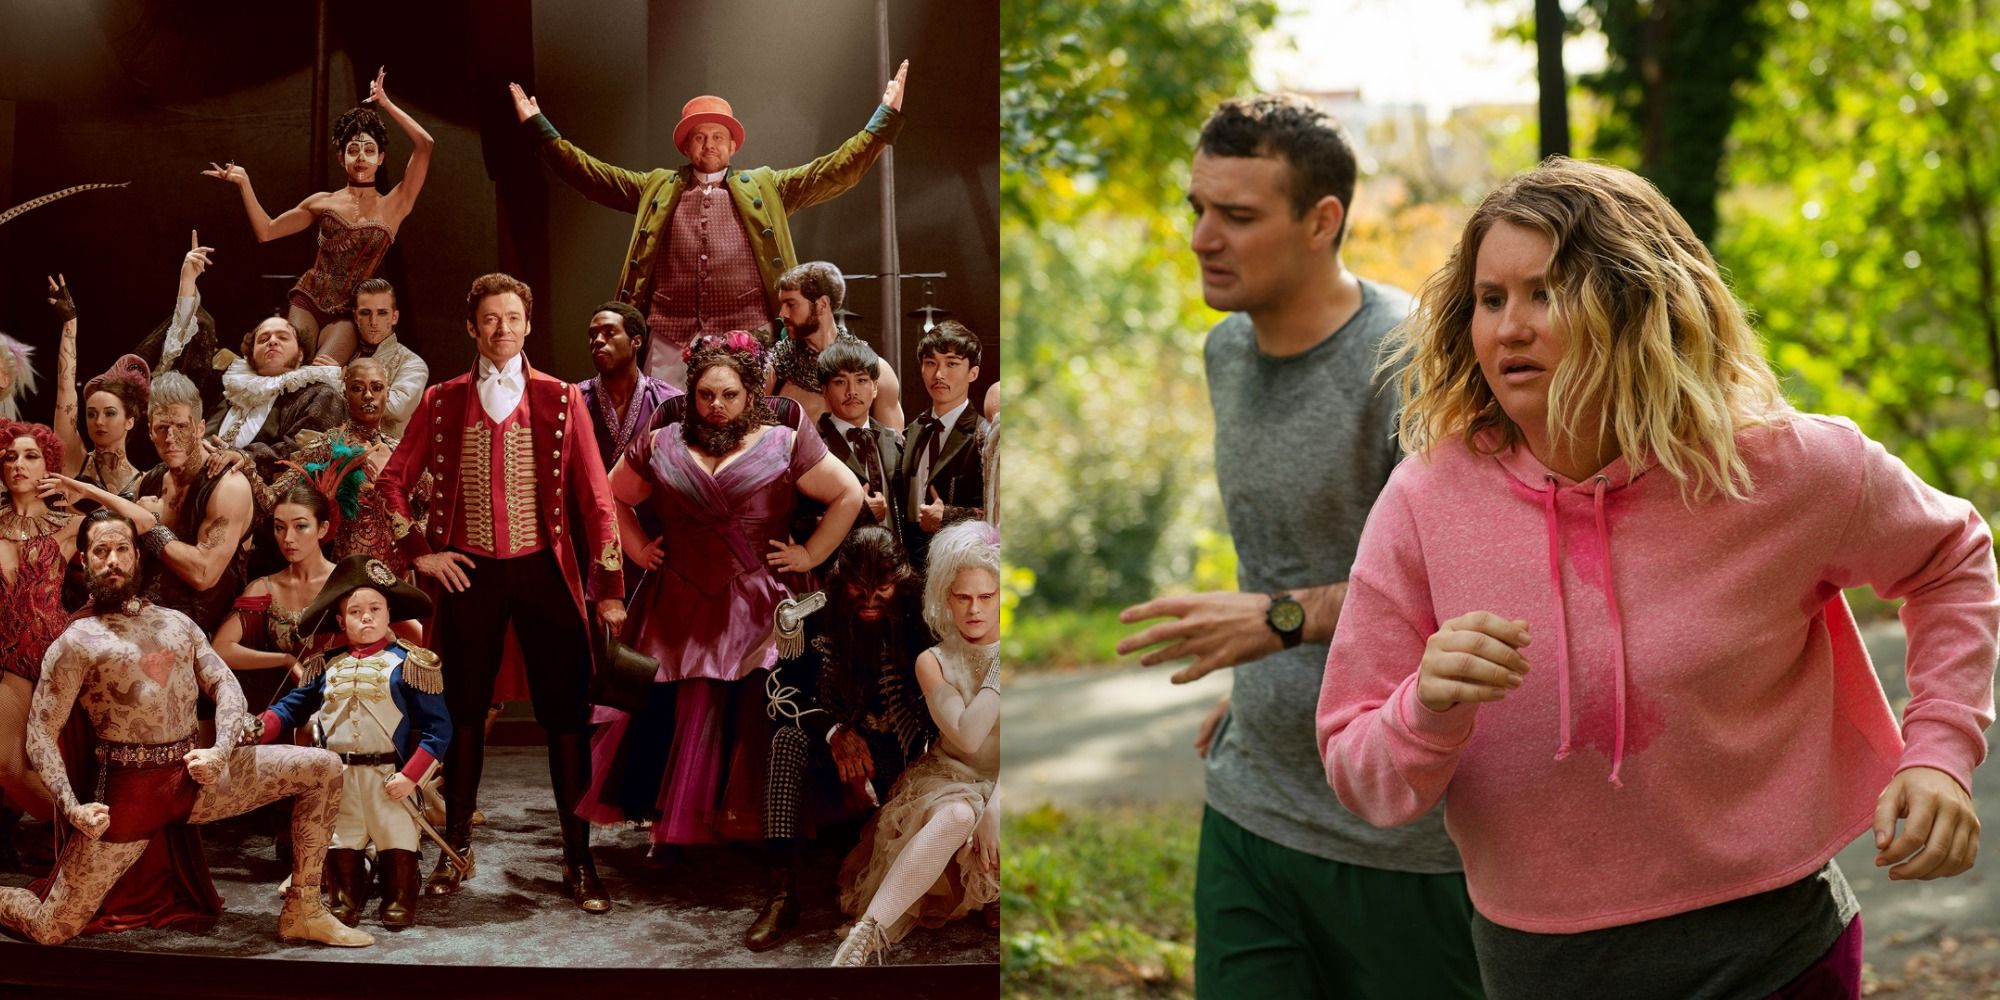 Split image showing scenes from The Greatest Showman and Brittany Runs a Marathon